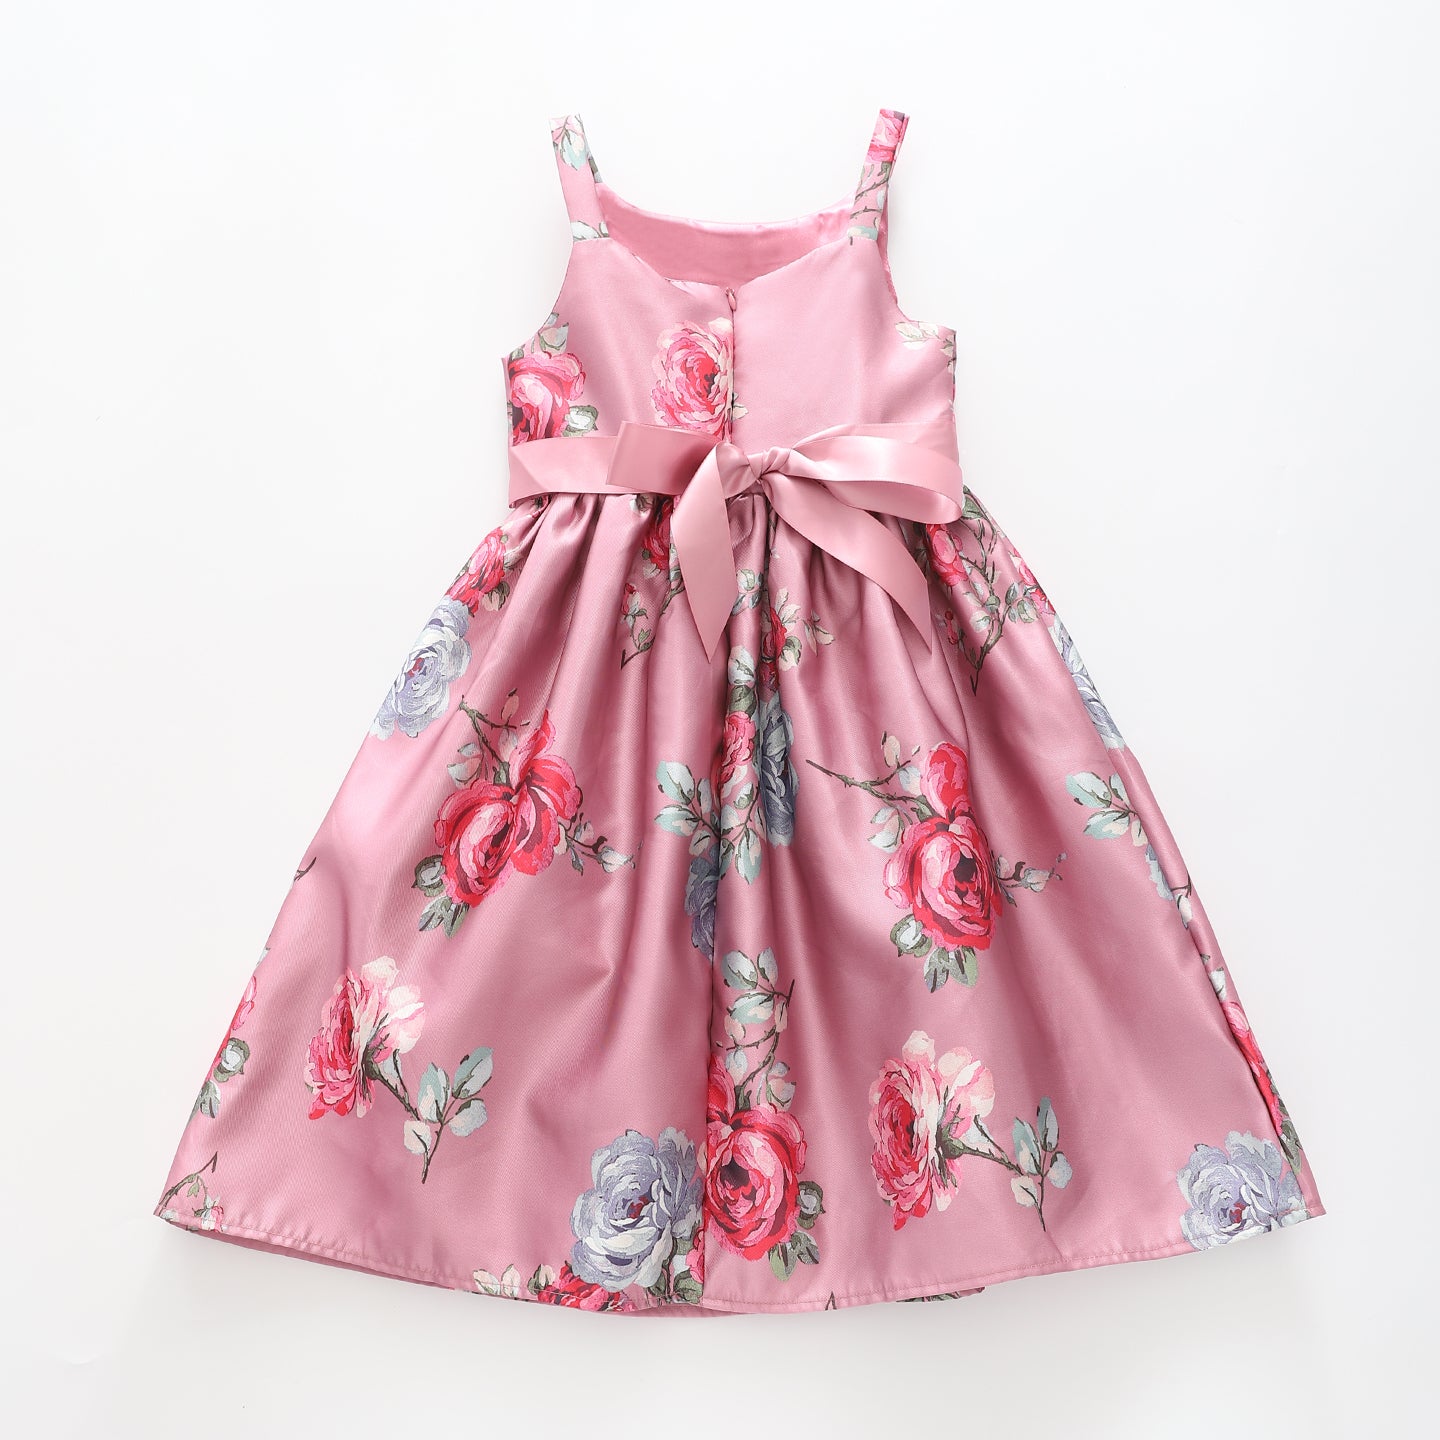 Girl's Dusty Pink Floral Party Dress